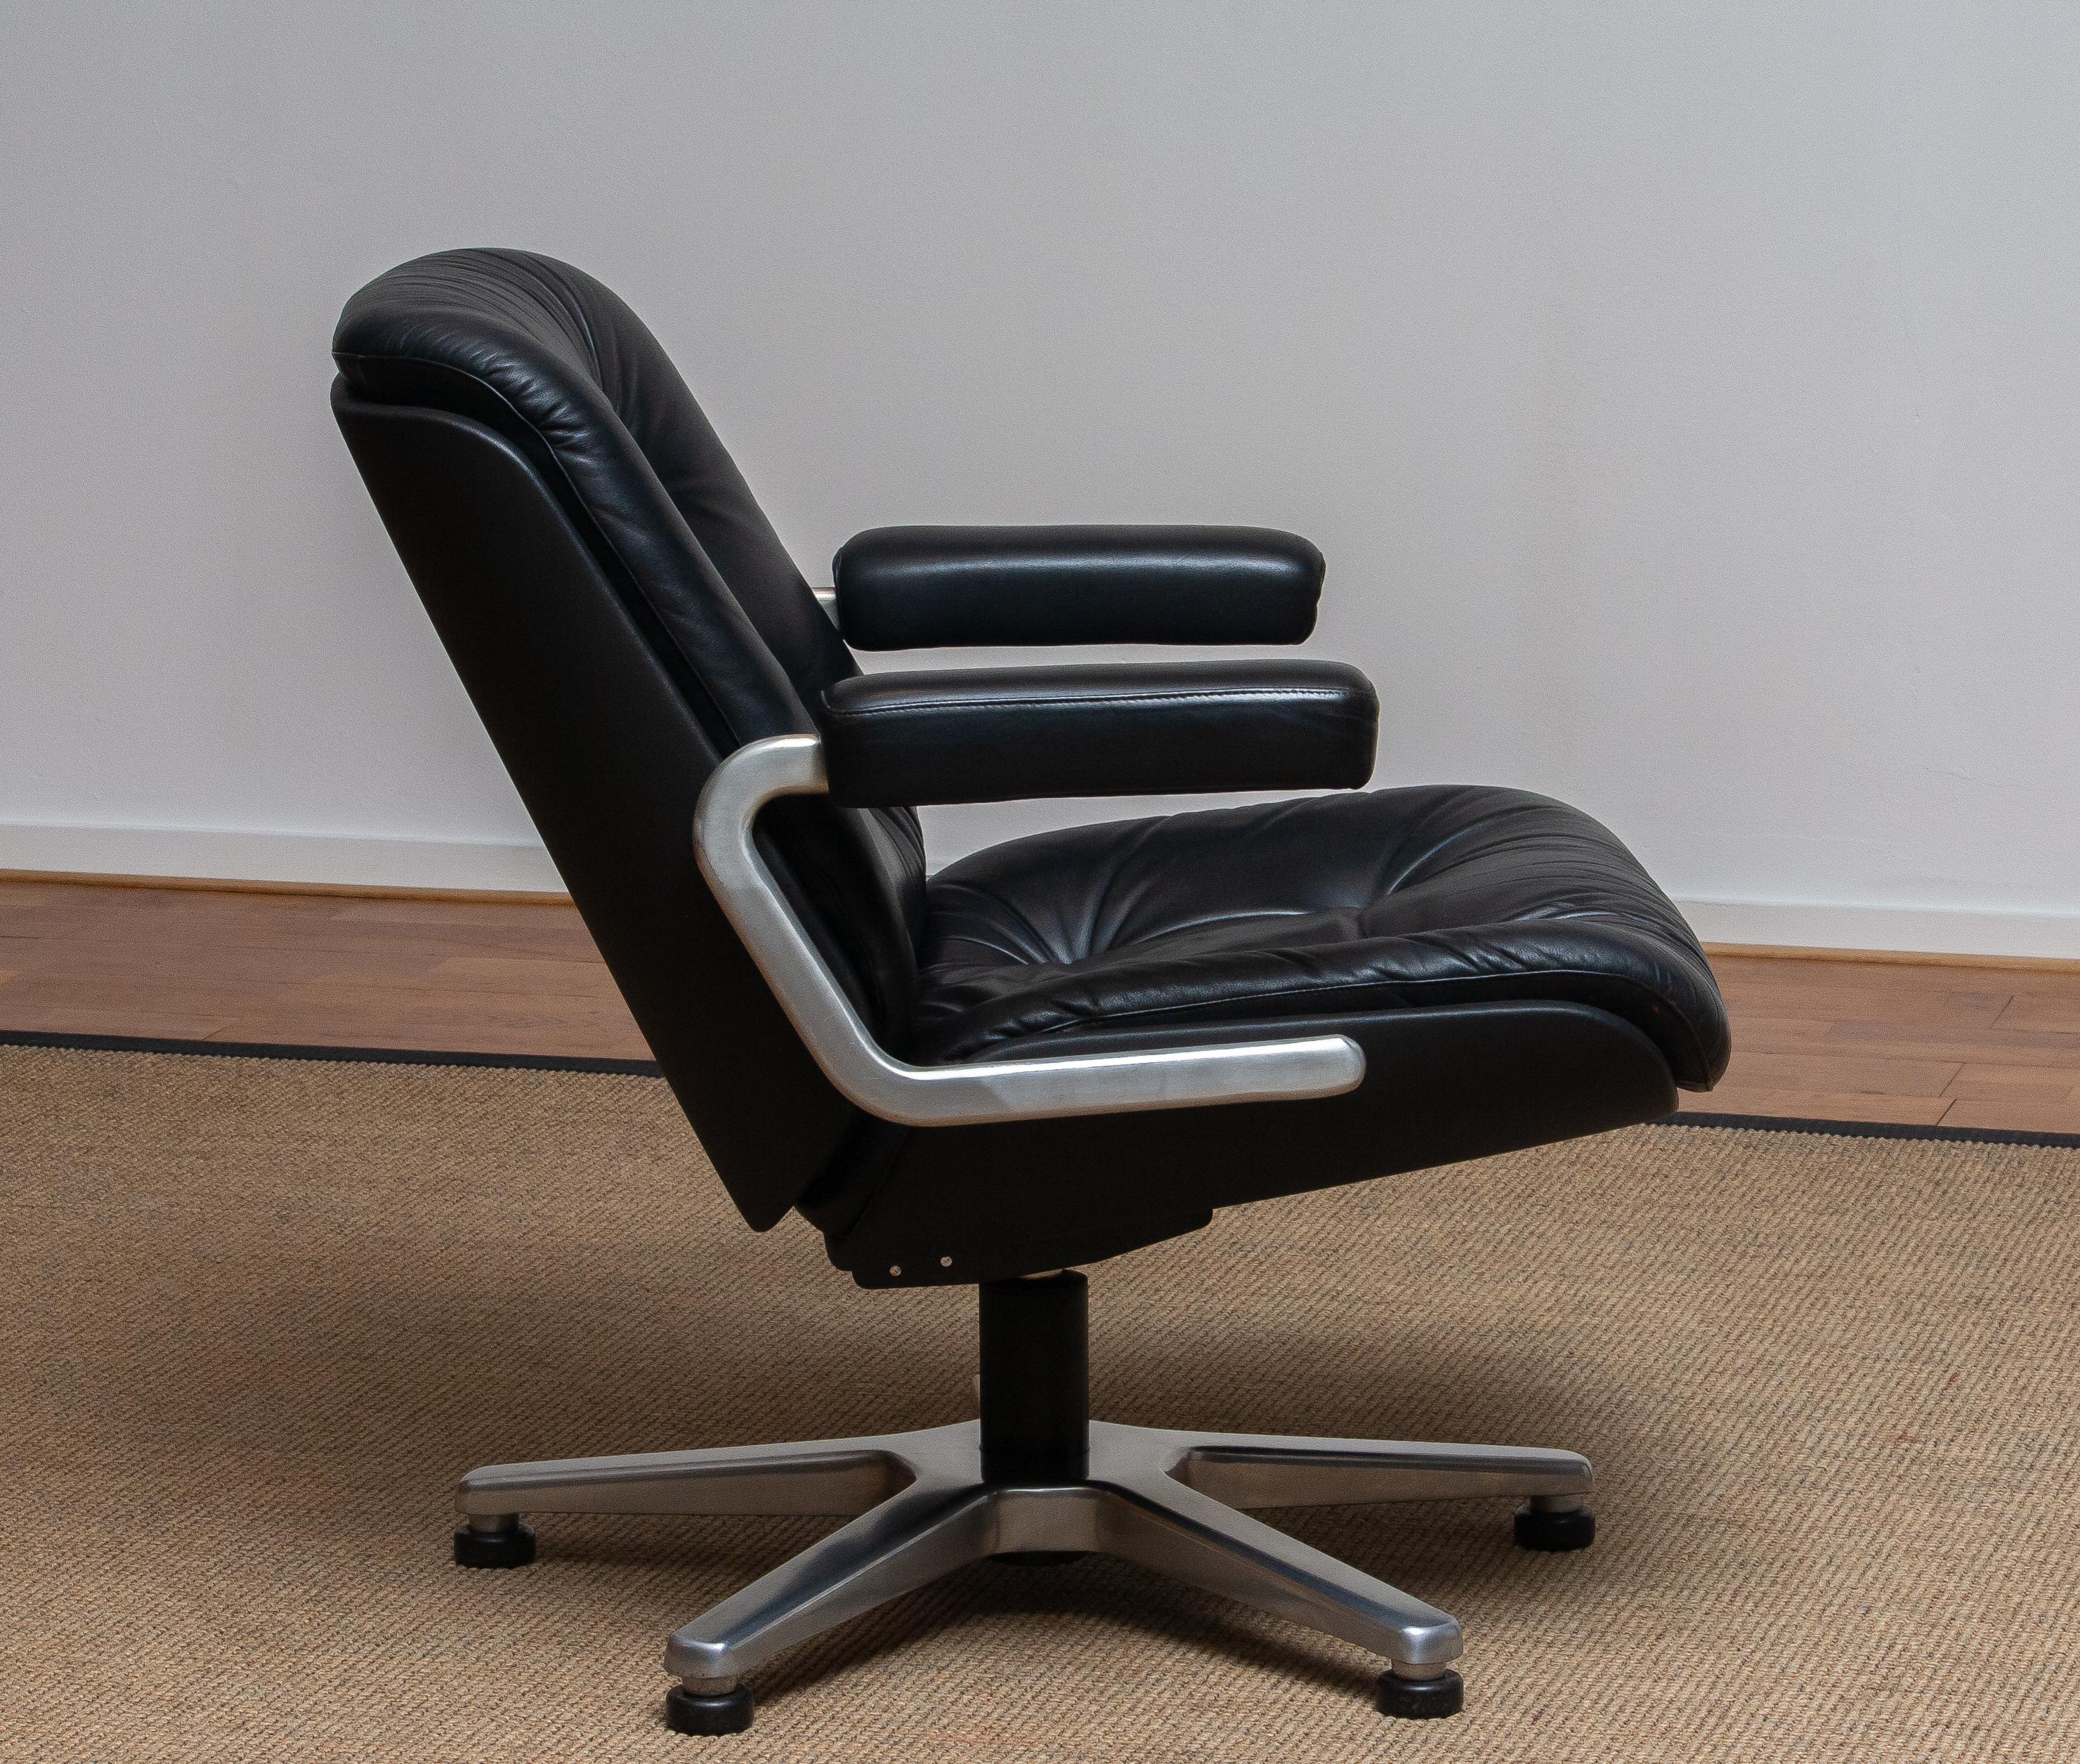 1960s, Black Leather Swivel Chair by Martin Stoll for Giroflex Stoll Mdl, 7065 2